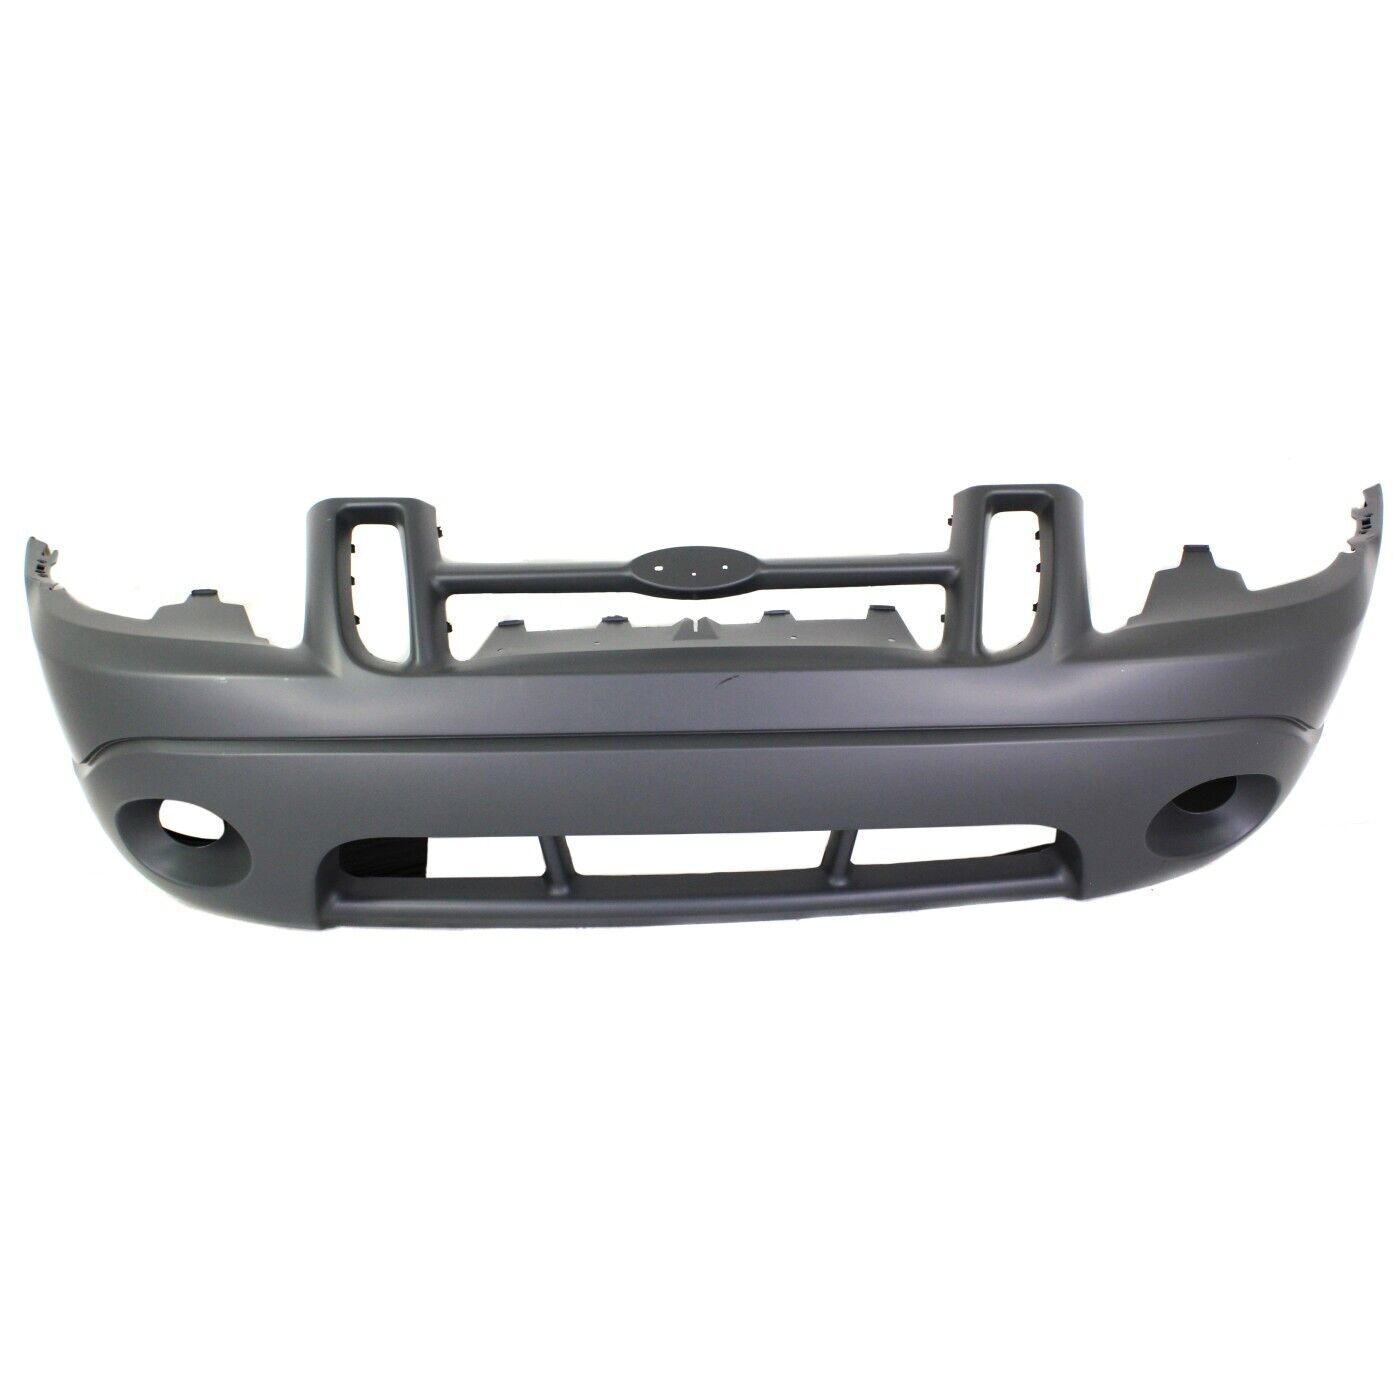 Front Bumper Cover For 04-05 Ford Explorer Sport Trac w/ fog lamp holes Primed